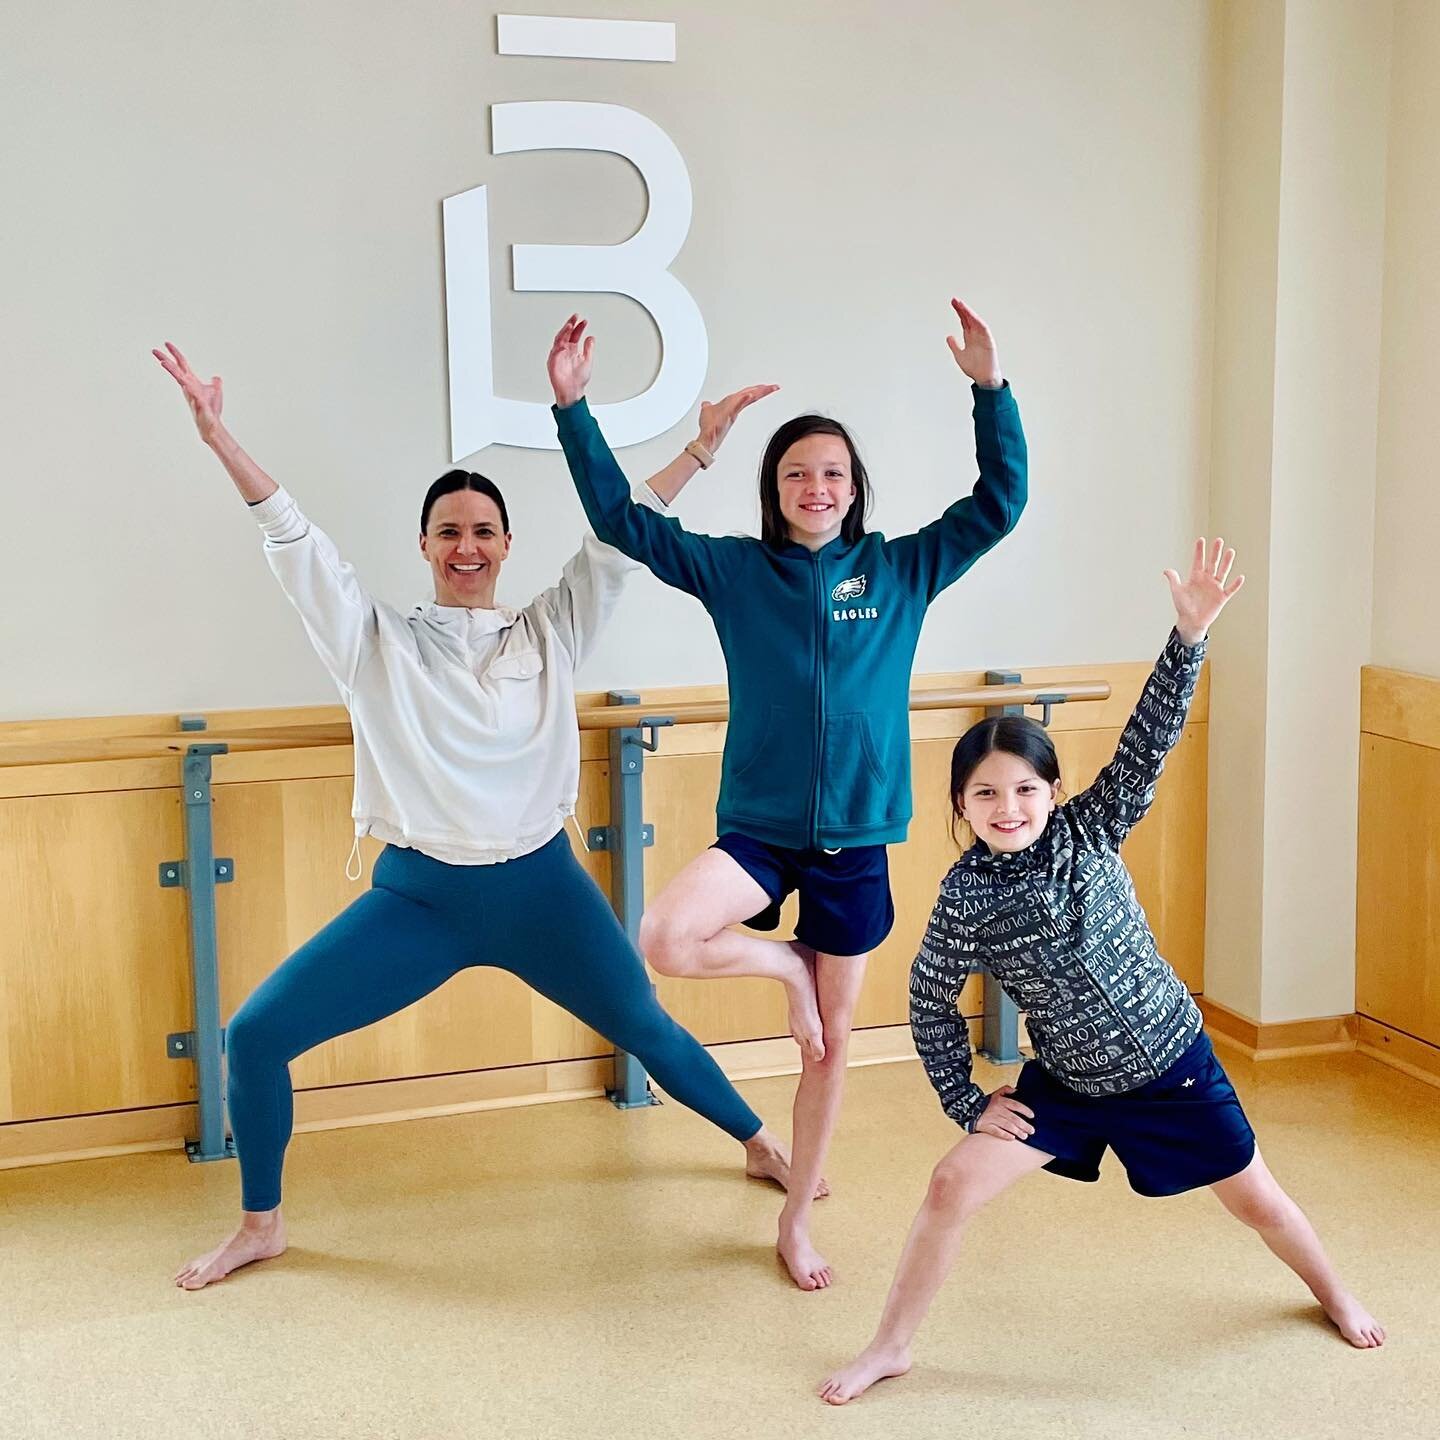 Barre3 Parent + Kid Class THIS SATURDAY! . In honor of Mother's Day, join us for a special Parent + Kid class on Saturday, May 13th at Noon! . I will be co-teaching a 30-minute class with Sierra &amp; Nora. Light refreshments provided after class!  S